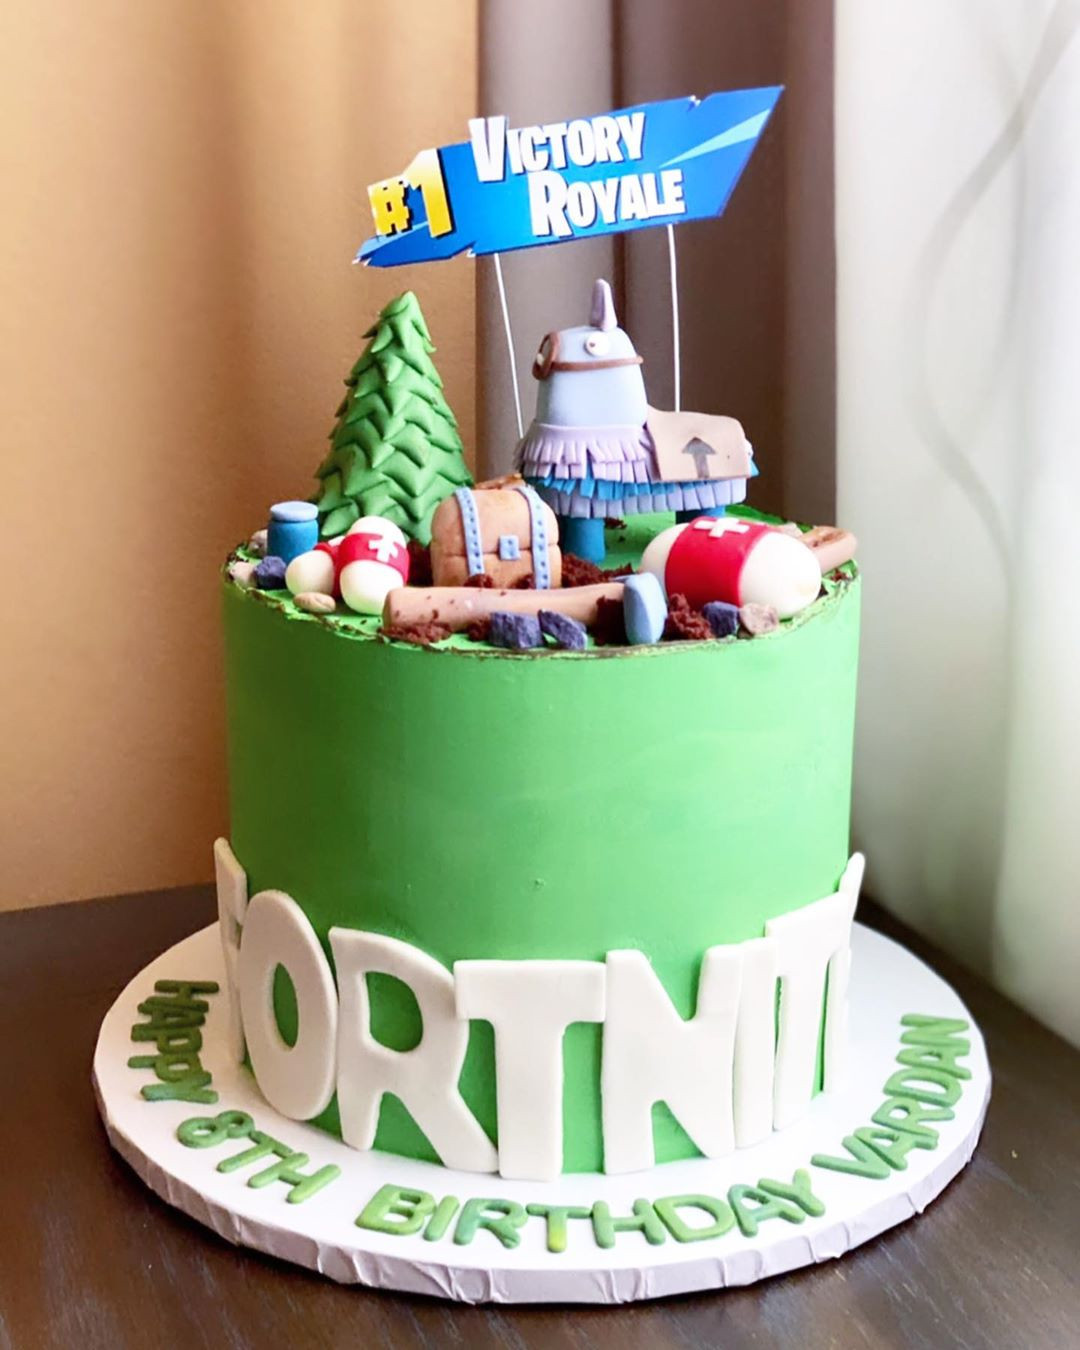 50 Fortnite Cake Ideas for Birthday Party in 2020,easy fortnite cake,fortnite cake images,fortnite cake ideas easy,fortnite cake decorations